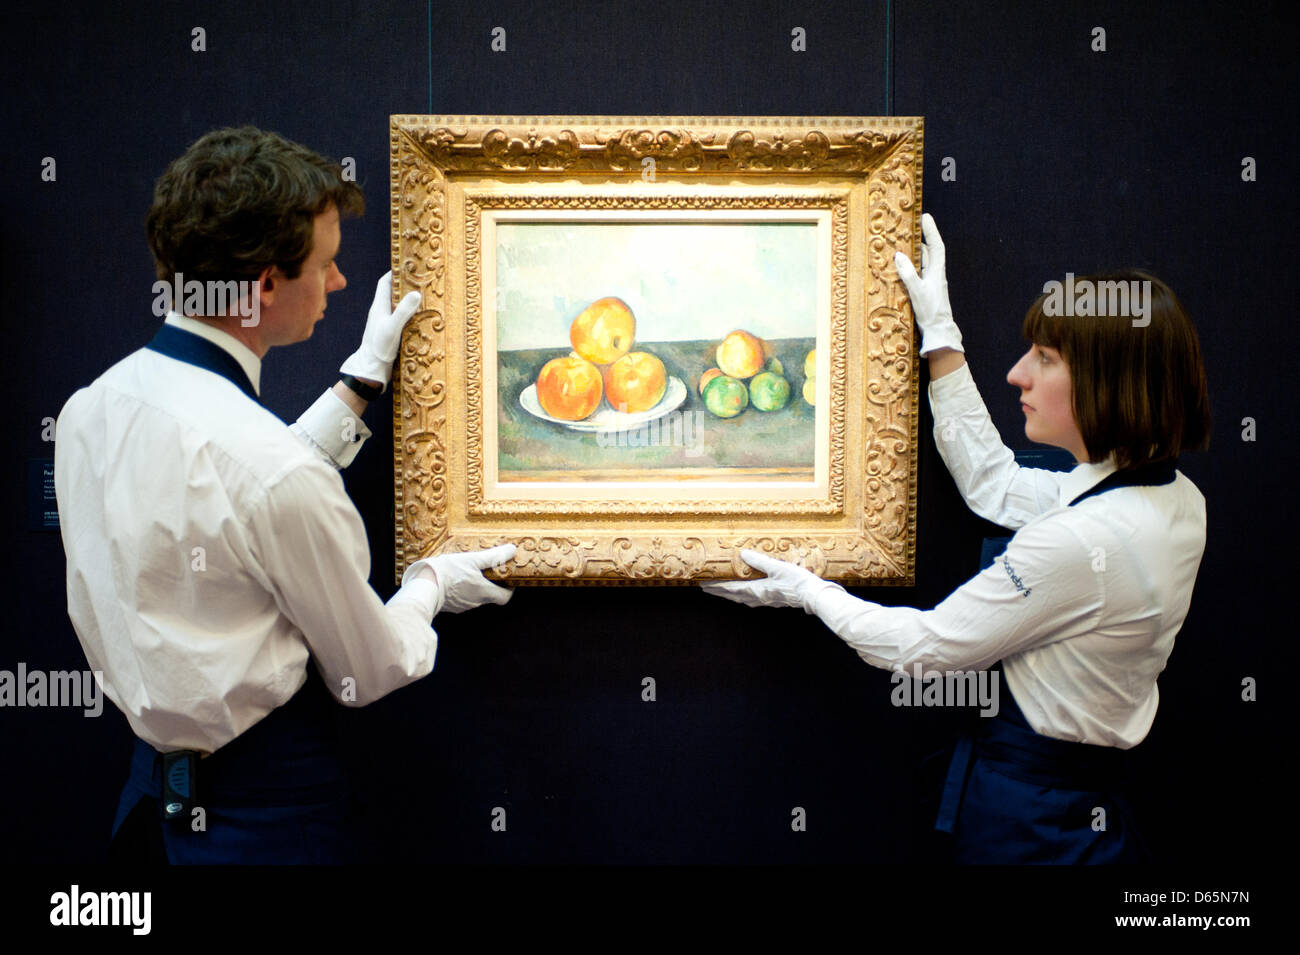 London, UK. 12th April 2013. Sotheby's employees pose in front of 'Les Pommes' by Paul Cezanne (Est. $25-35 million). The work will go on sale at Sotheby’s New York in May 2013. The Blockbuster sales at include works by Richter, Modigliani, Picasso, Rodin, Bacon, Cezanne. Credit: Piero Cruciatti / Alamy Live News Stock Photo